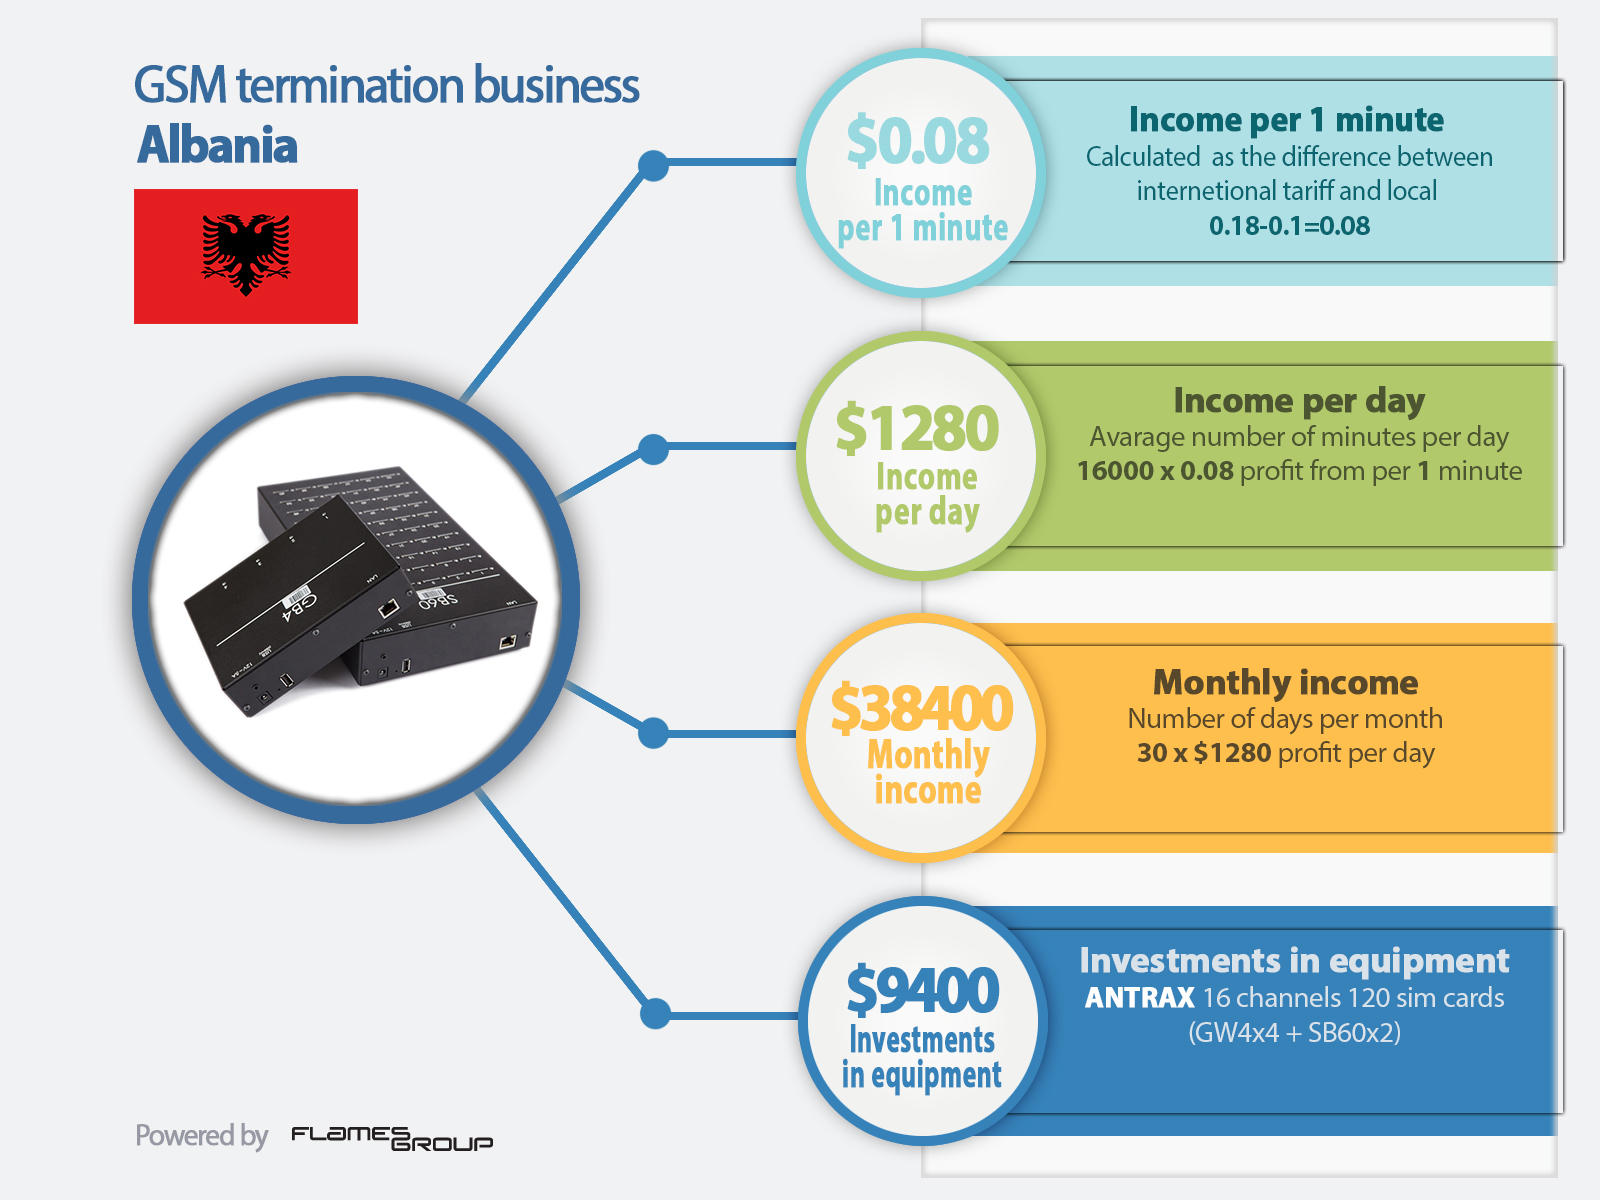 GSM termination in Albania - Infographic ANTRAX